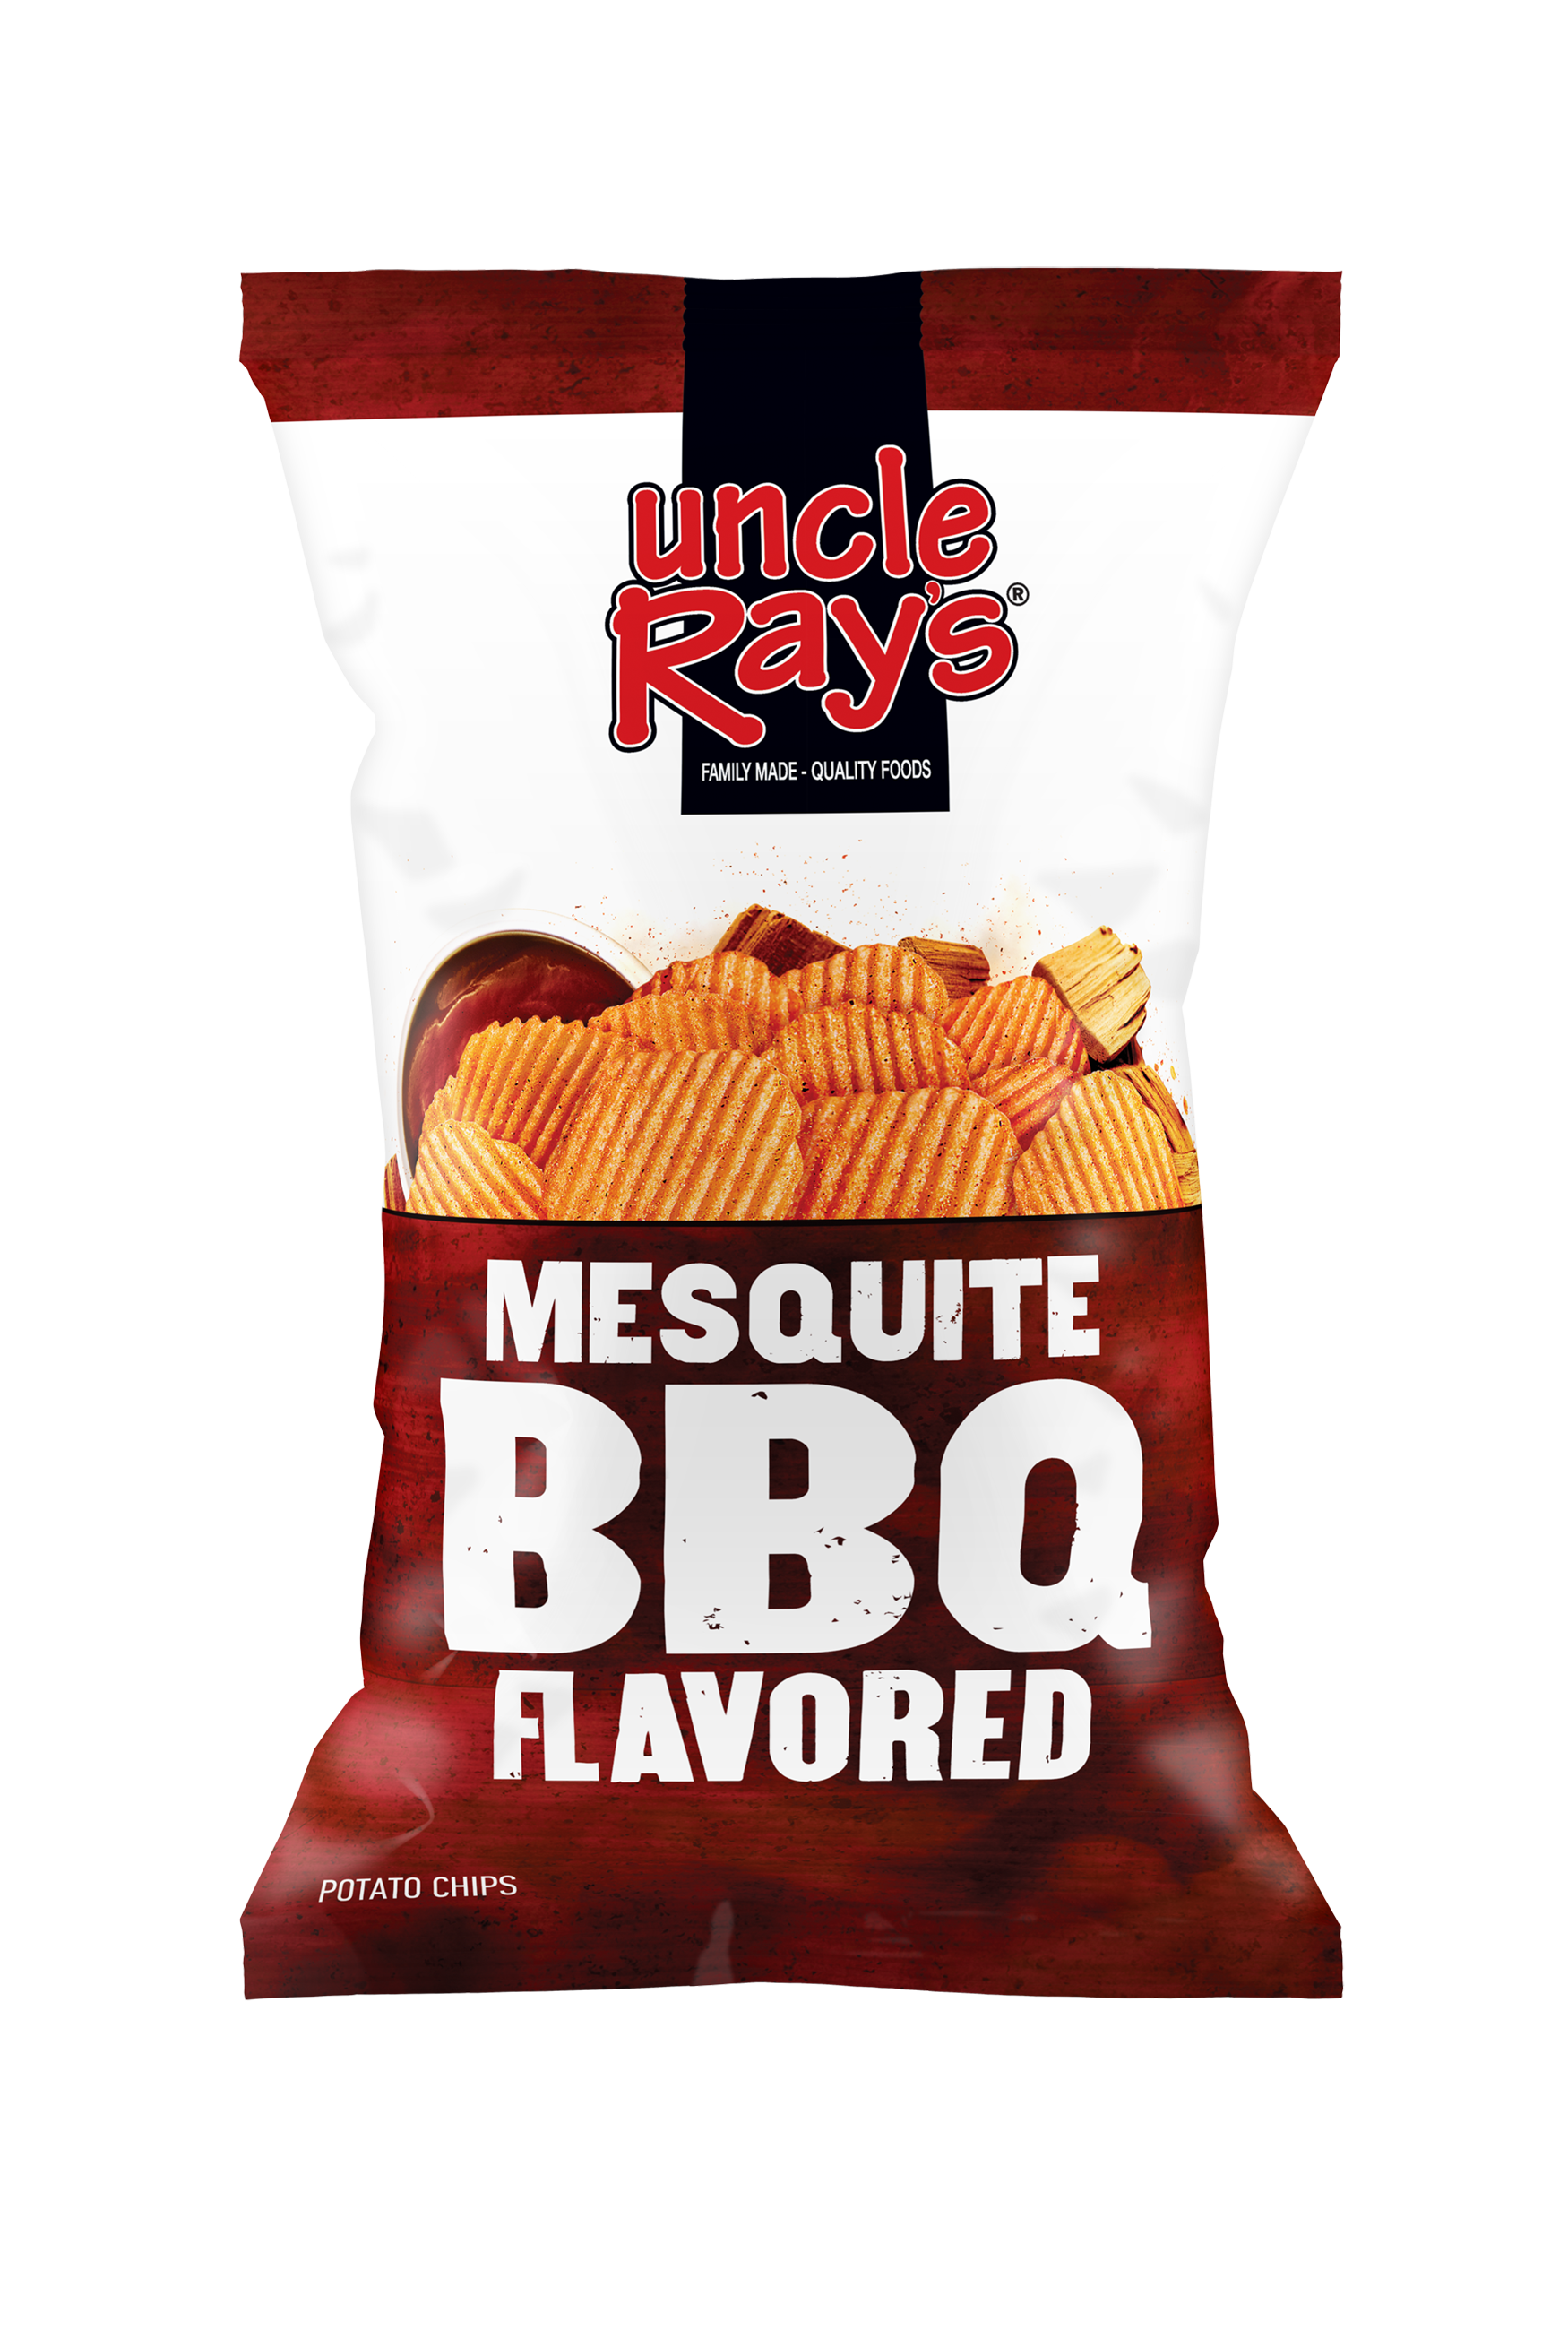 Uncle rays mesquite bbq chips 3oz